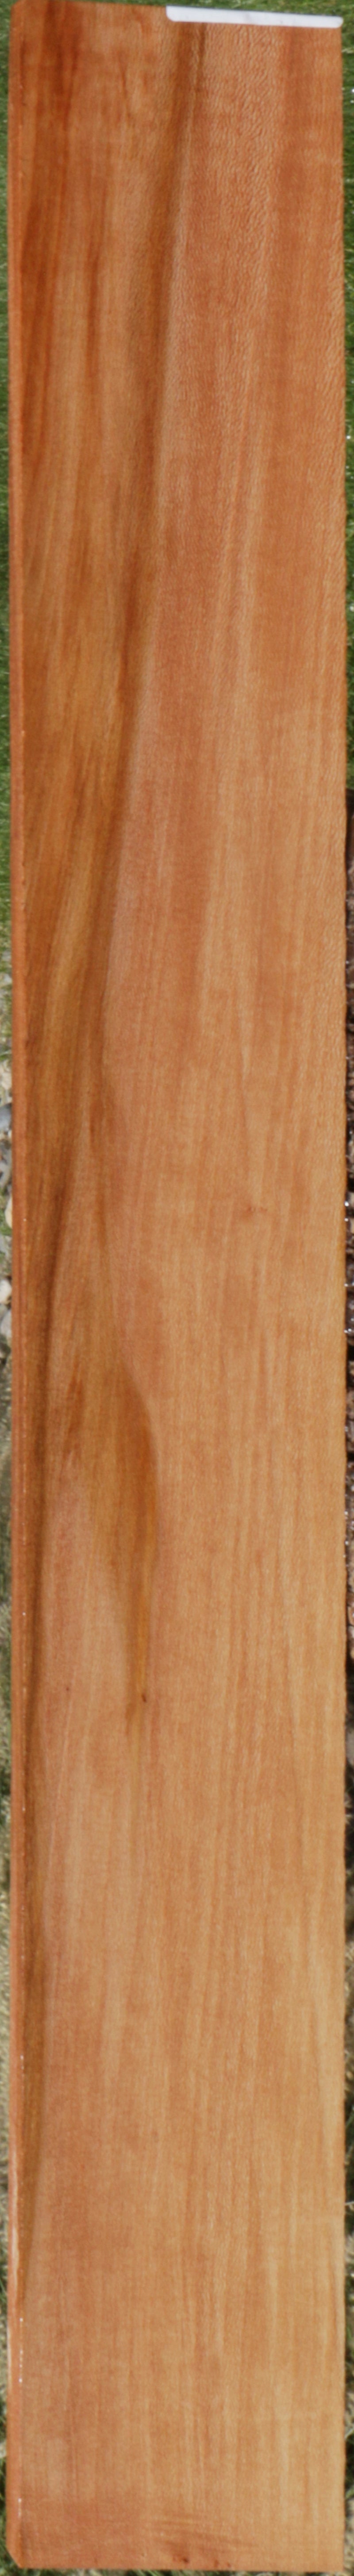 Sycamore Lumber